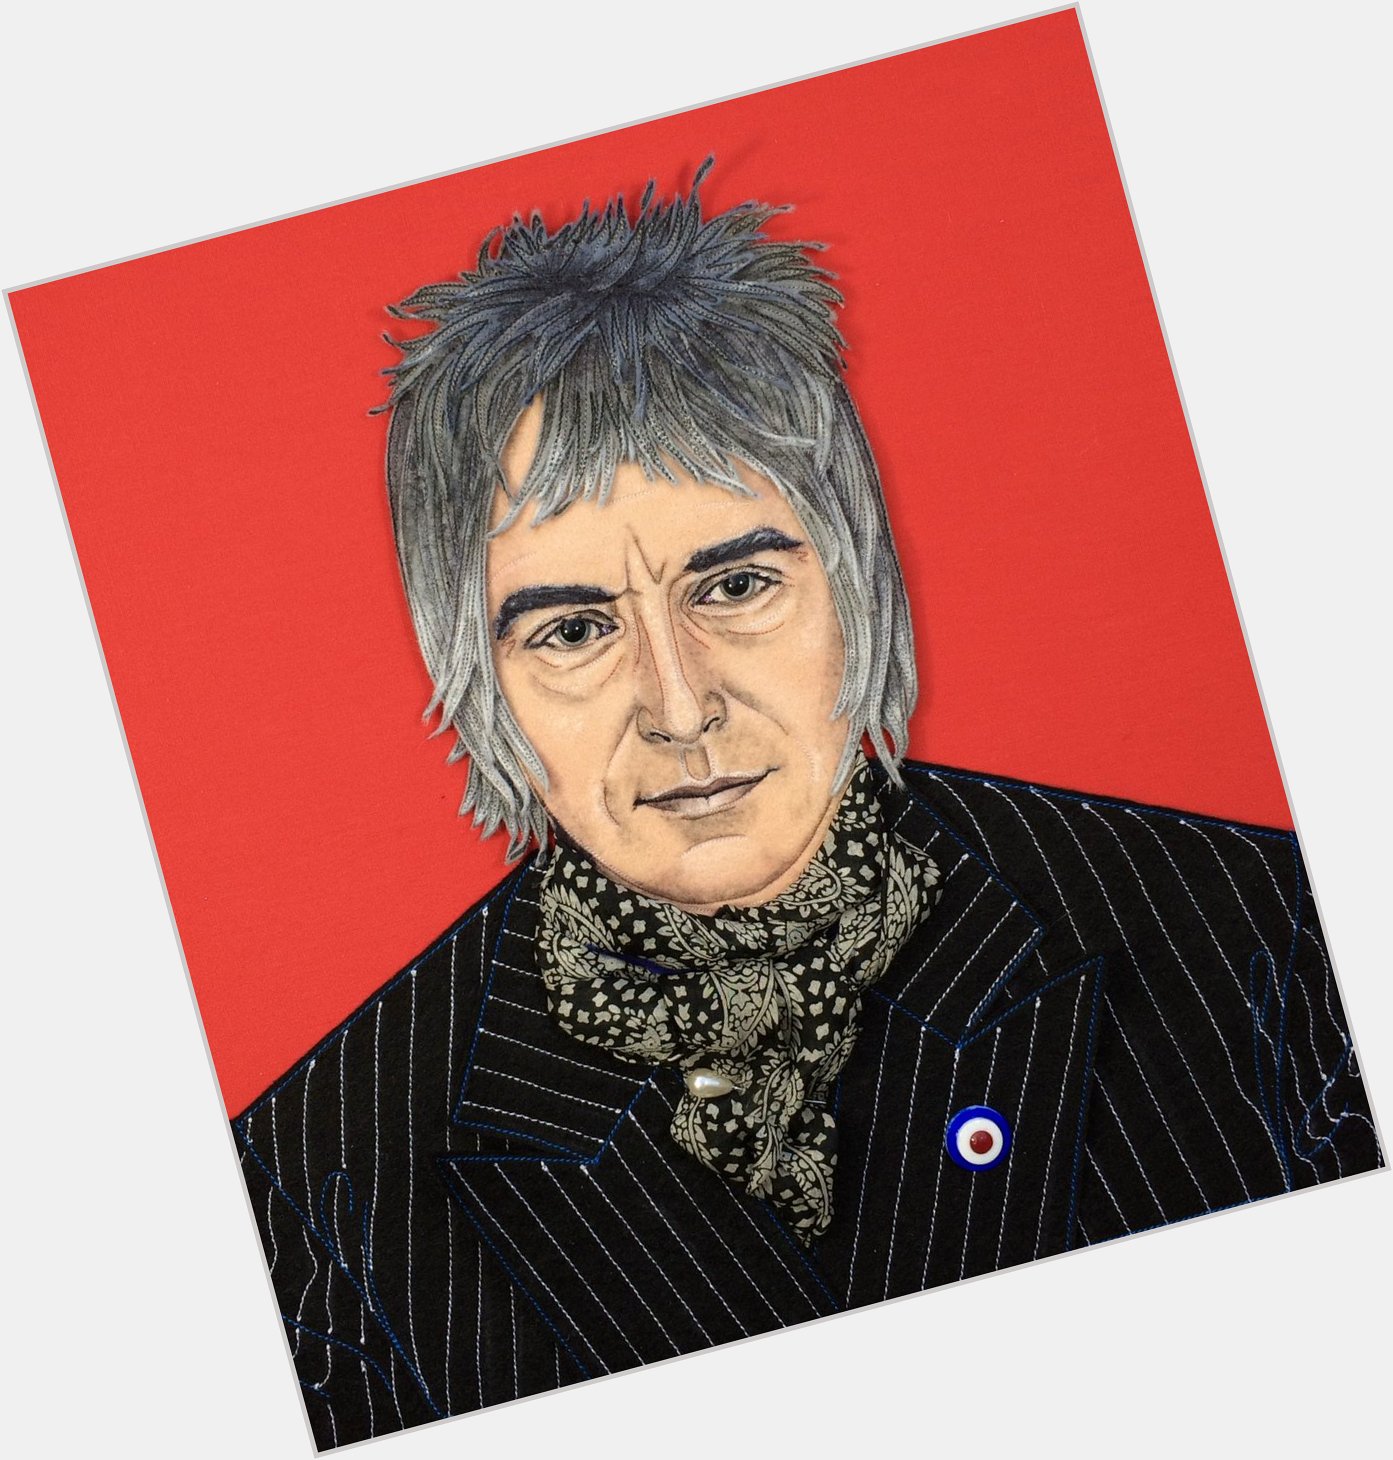 HAPPY BIRTHDAY MOD FATHER. 
A PORTRAIT I STITCHED OF PAUL WELLER A WHILE AGO. 